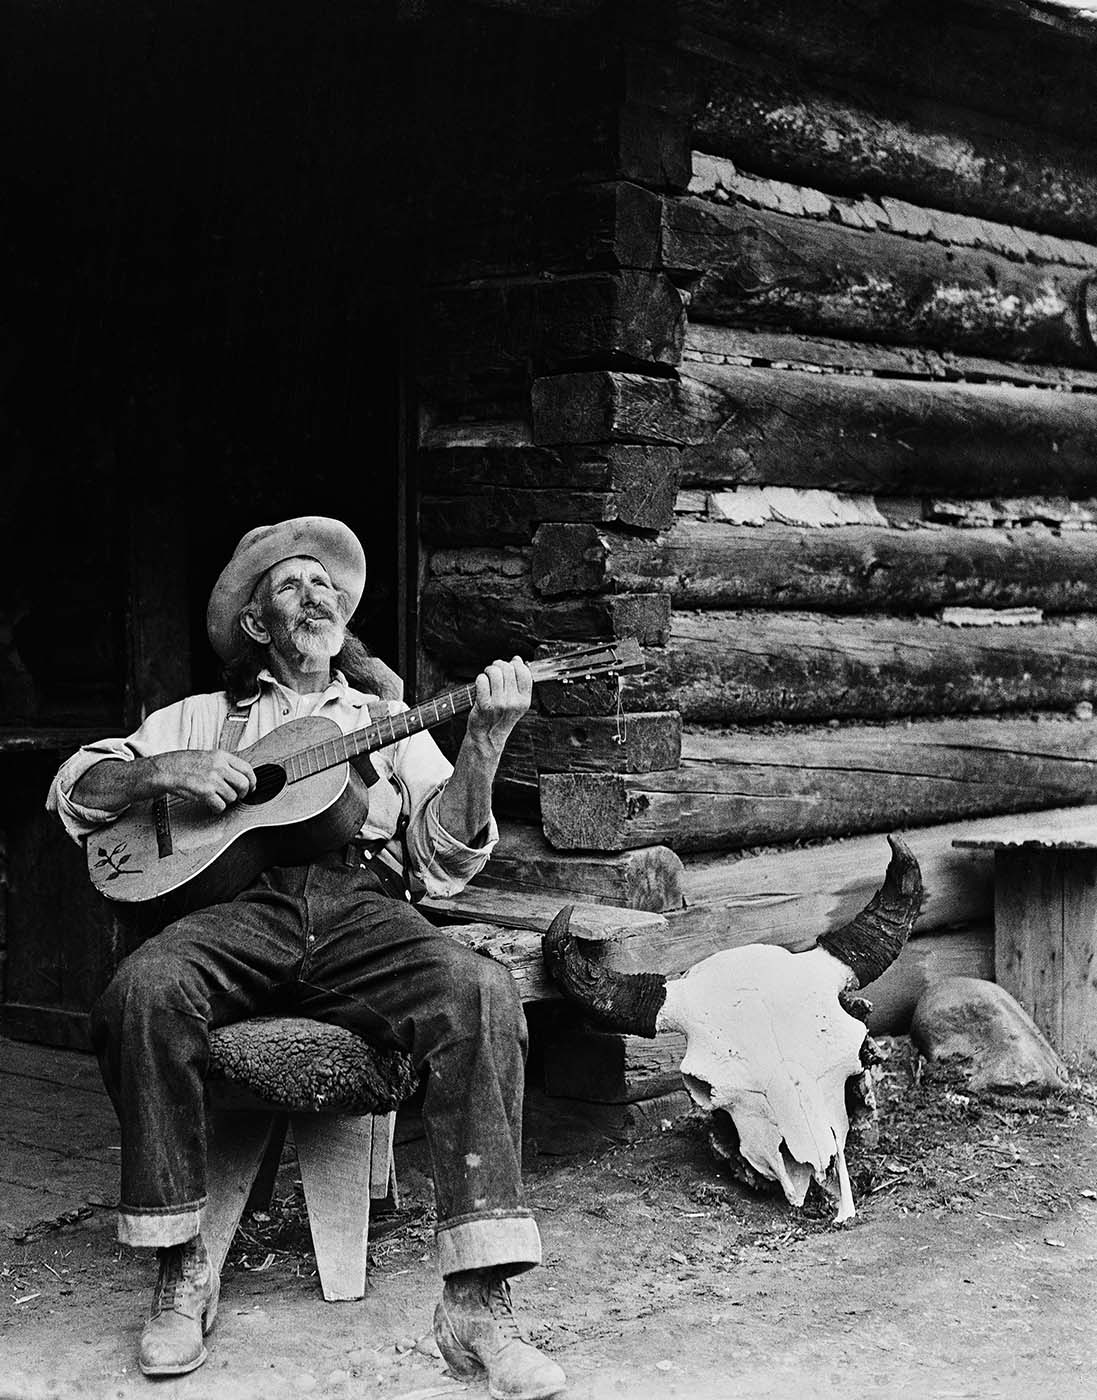 Jack 'Two Dog' Scott playing guitar on porch Pitchfork Ranch bunkhouse. MS 003 Charles Belden Collection. PN.67.62